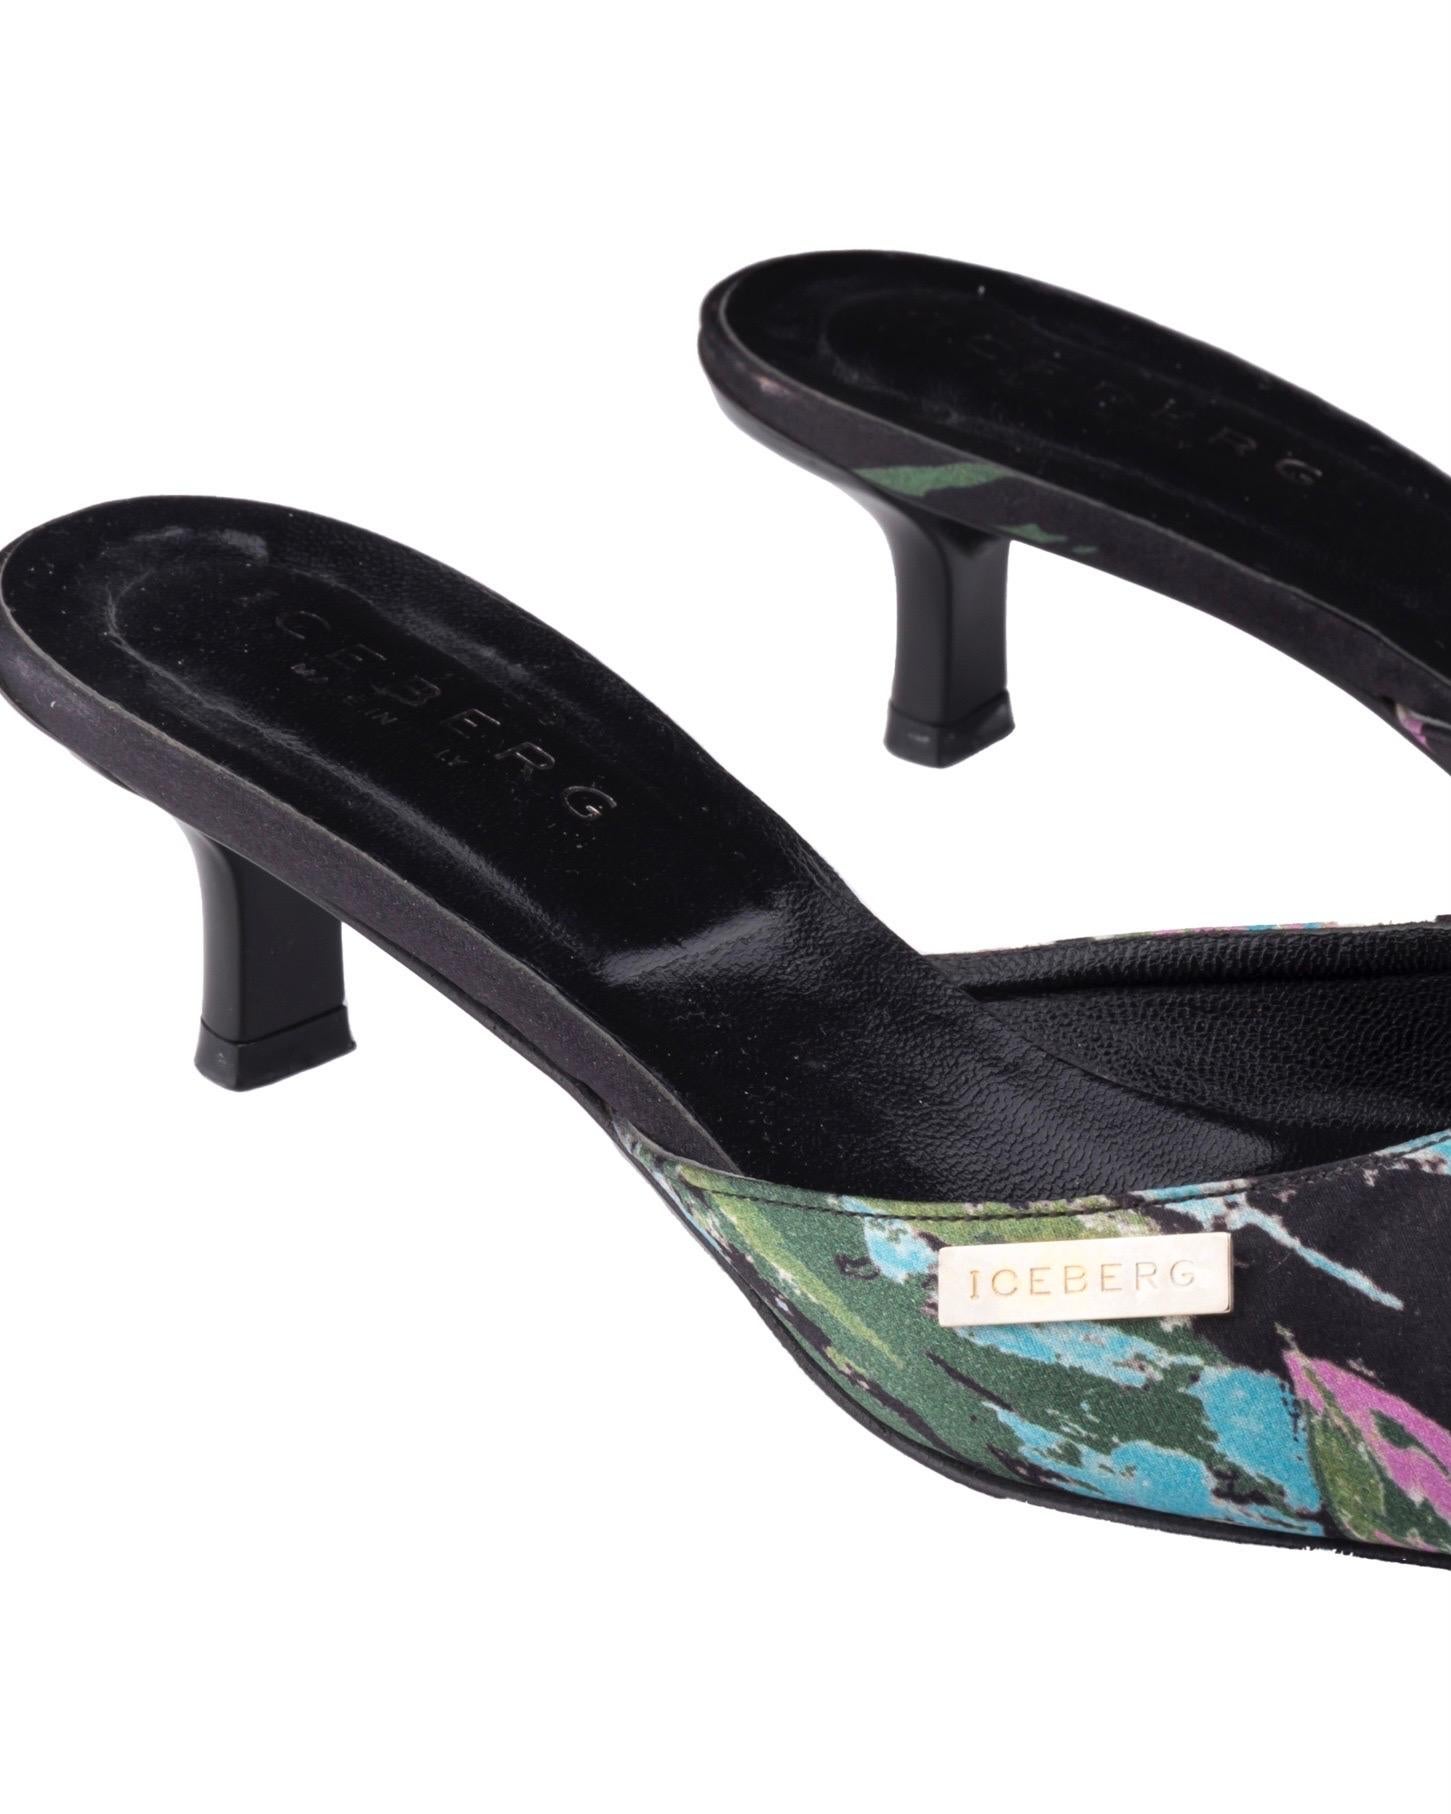 - Iceberg silk mules 
- Sold by Gold Palms Vintage
- Spring/Summer 2003 
- Black/pink/blue floral graphic print
- Kitten heels
- Size 38 / US 7